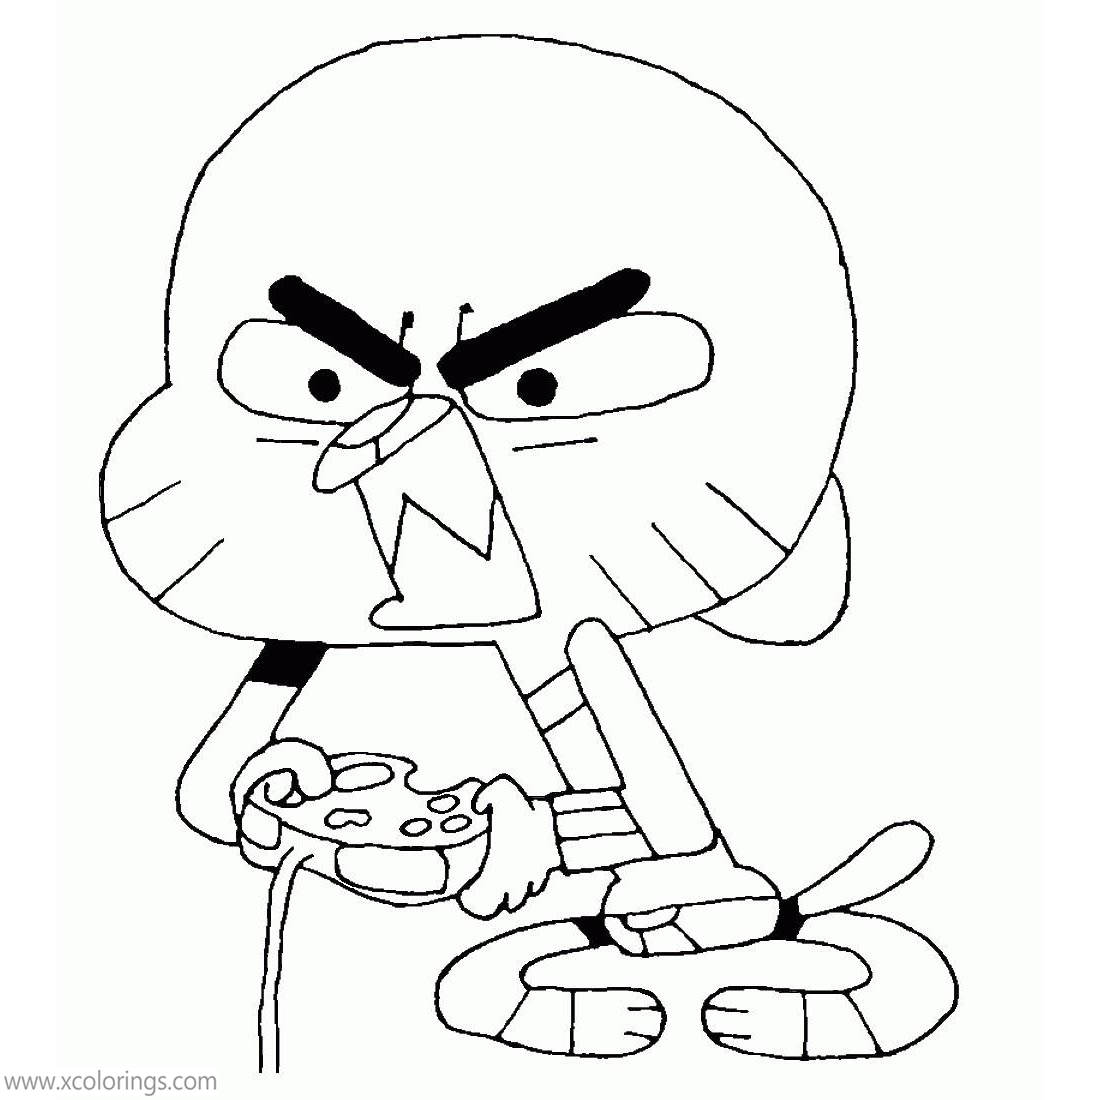 Free The Amazing World of Gumball Coloring Pages Playing Video Game printable